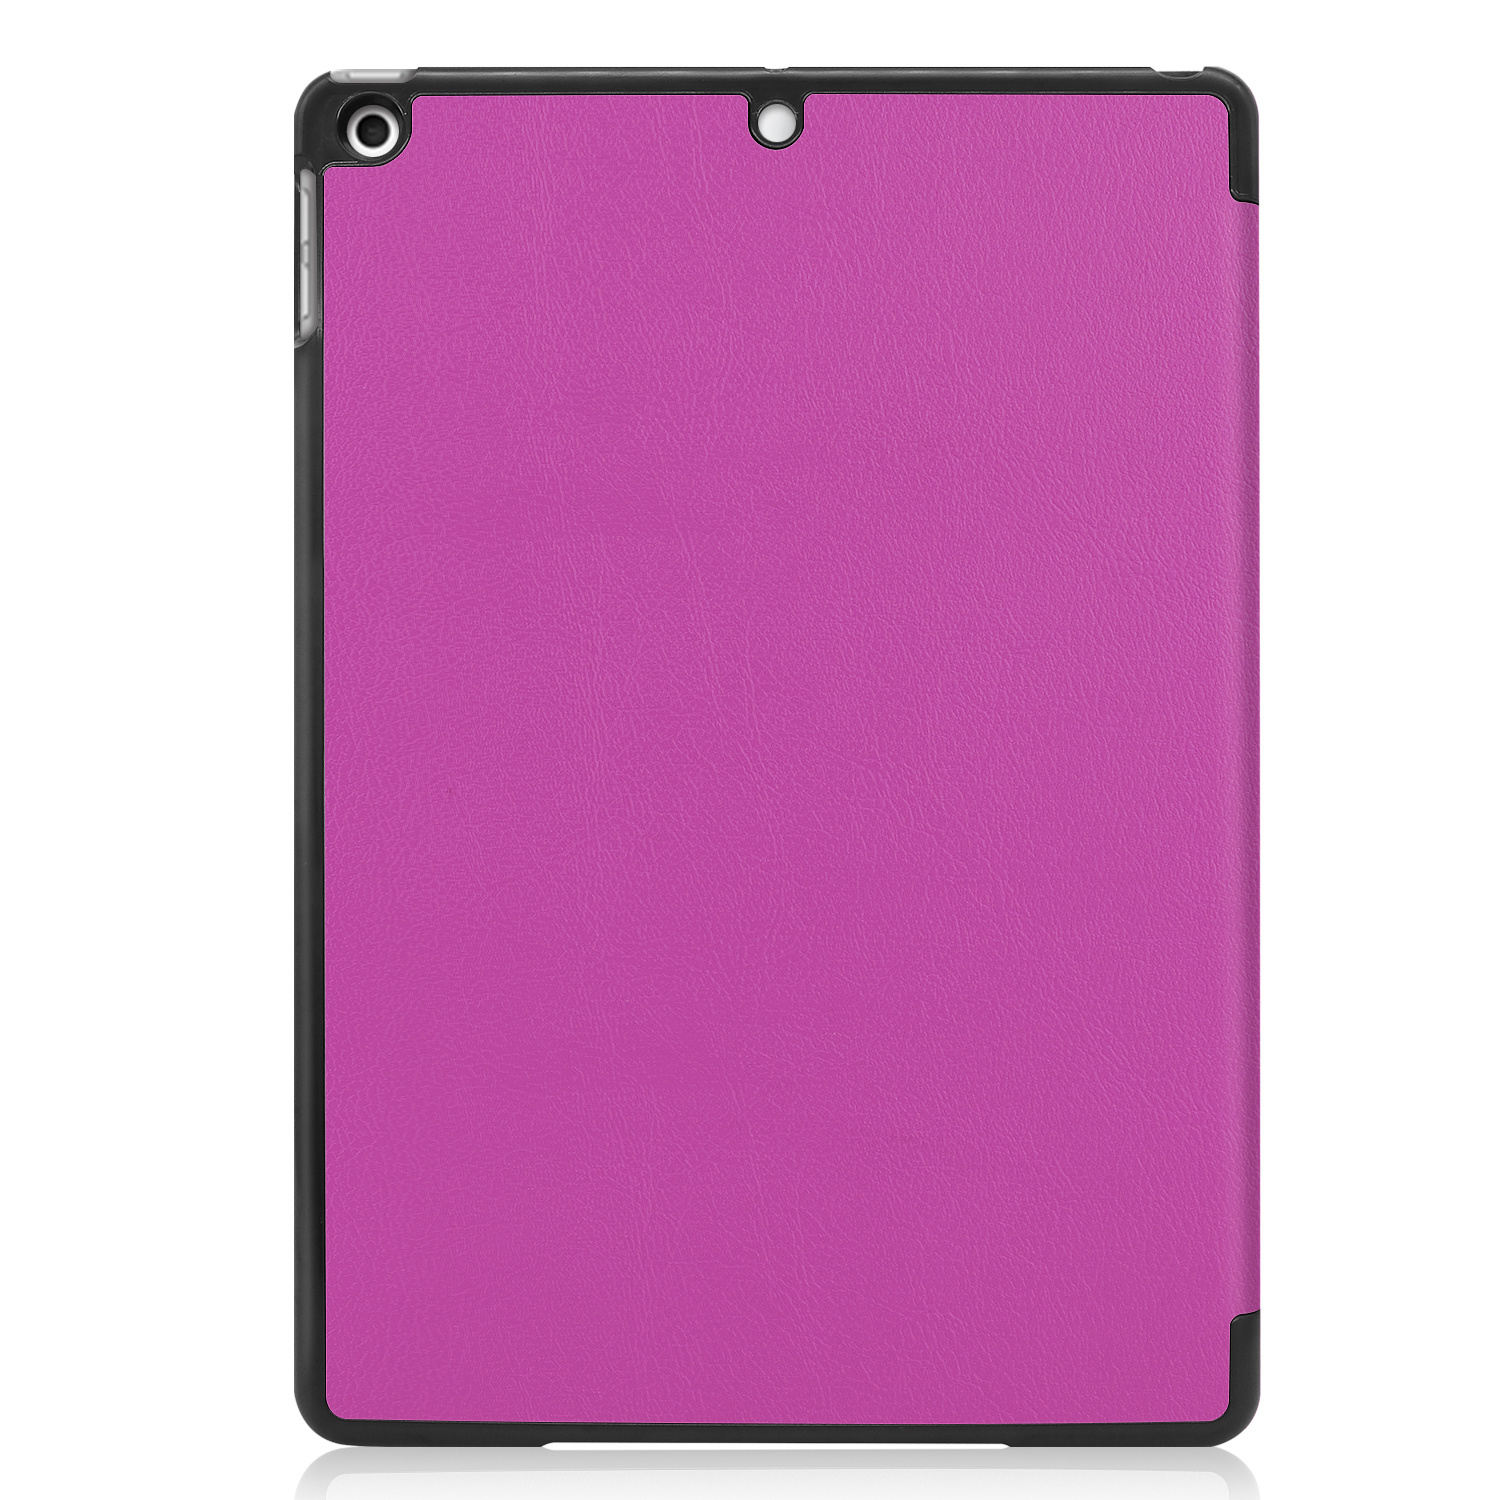 Nomfy iPad 10.2 2019 Hoesje Book Case Hoes - iPad 10.2 2019 Hoes Hardcover Case Hoesje - Paars